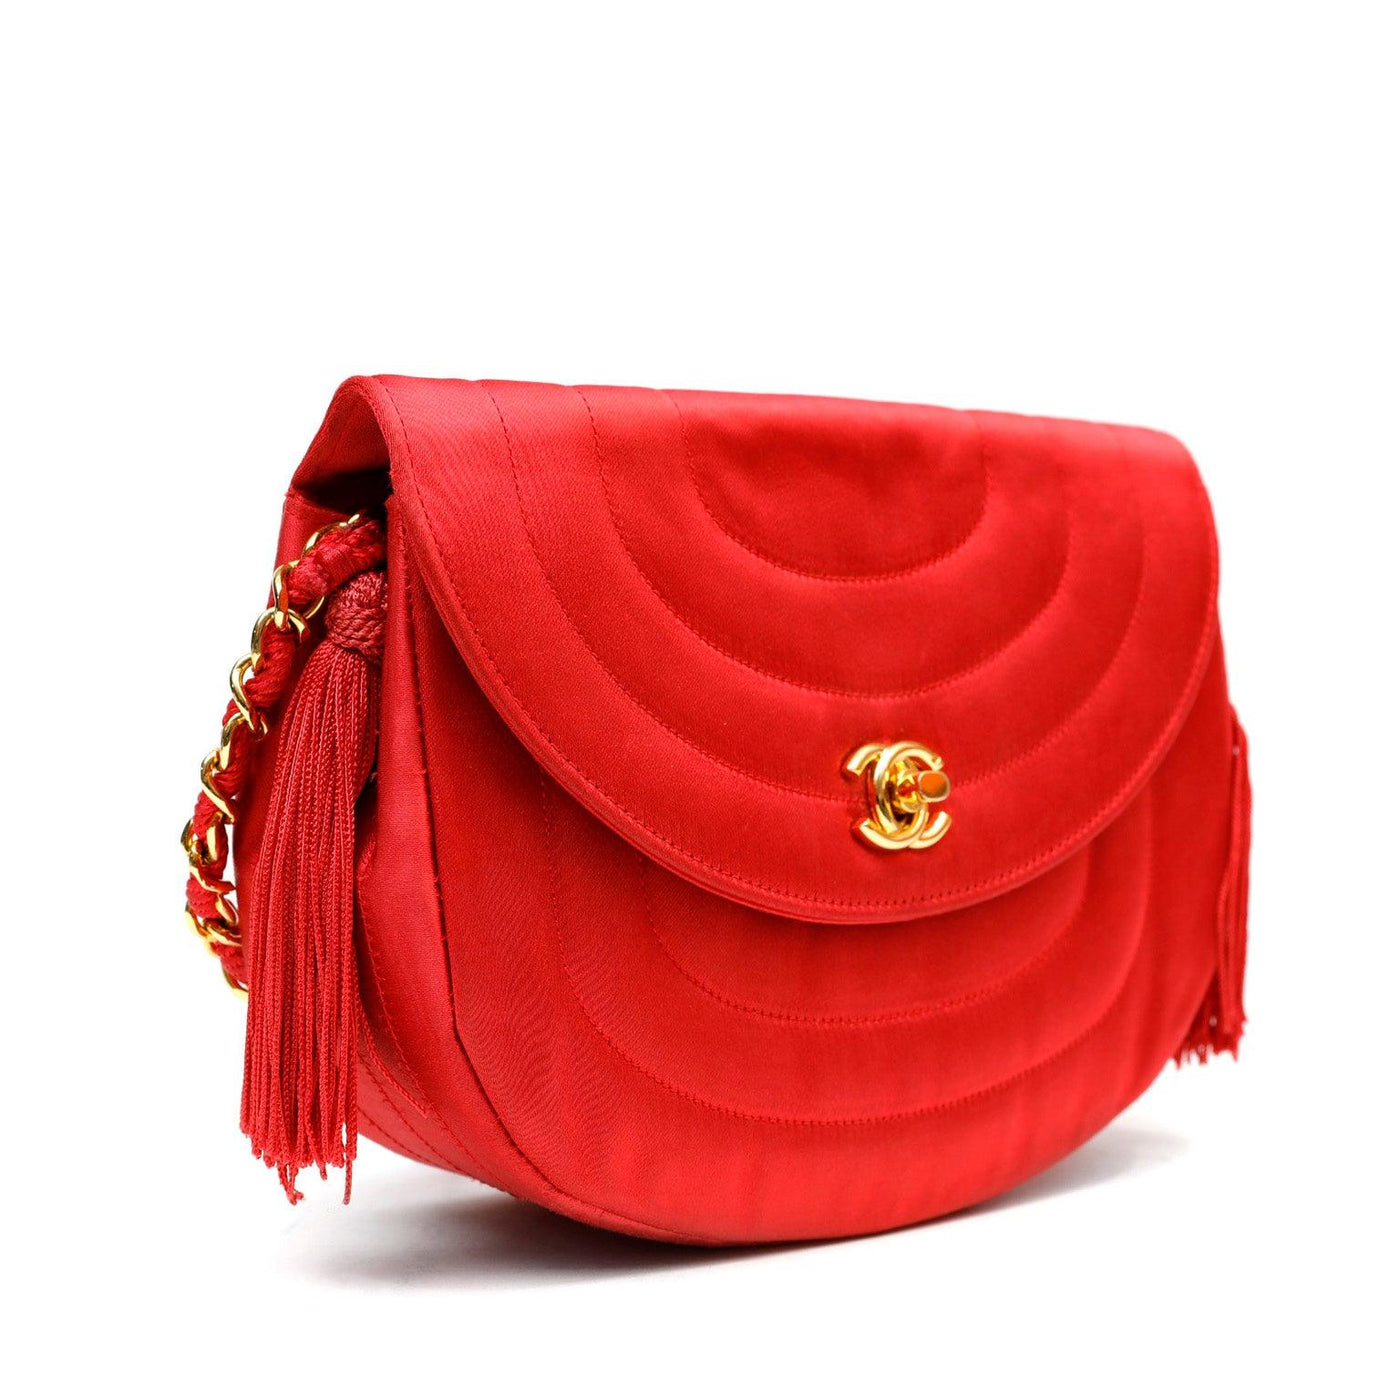 Chanel Red Satin Vintage Evening Crossbody Bag – Only Authentics